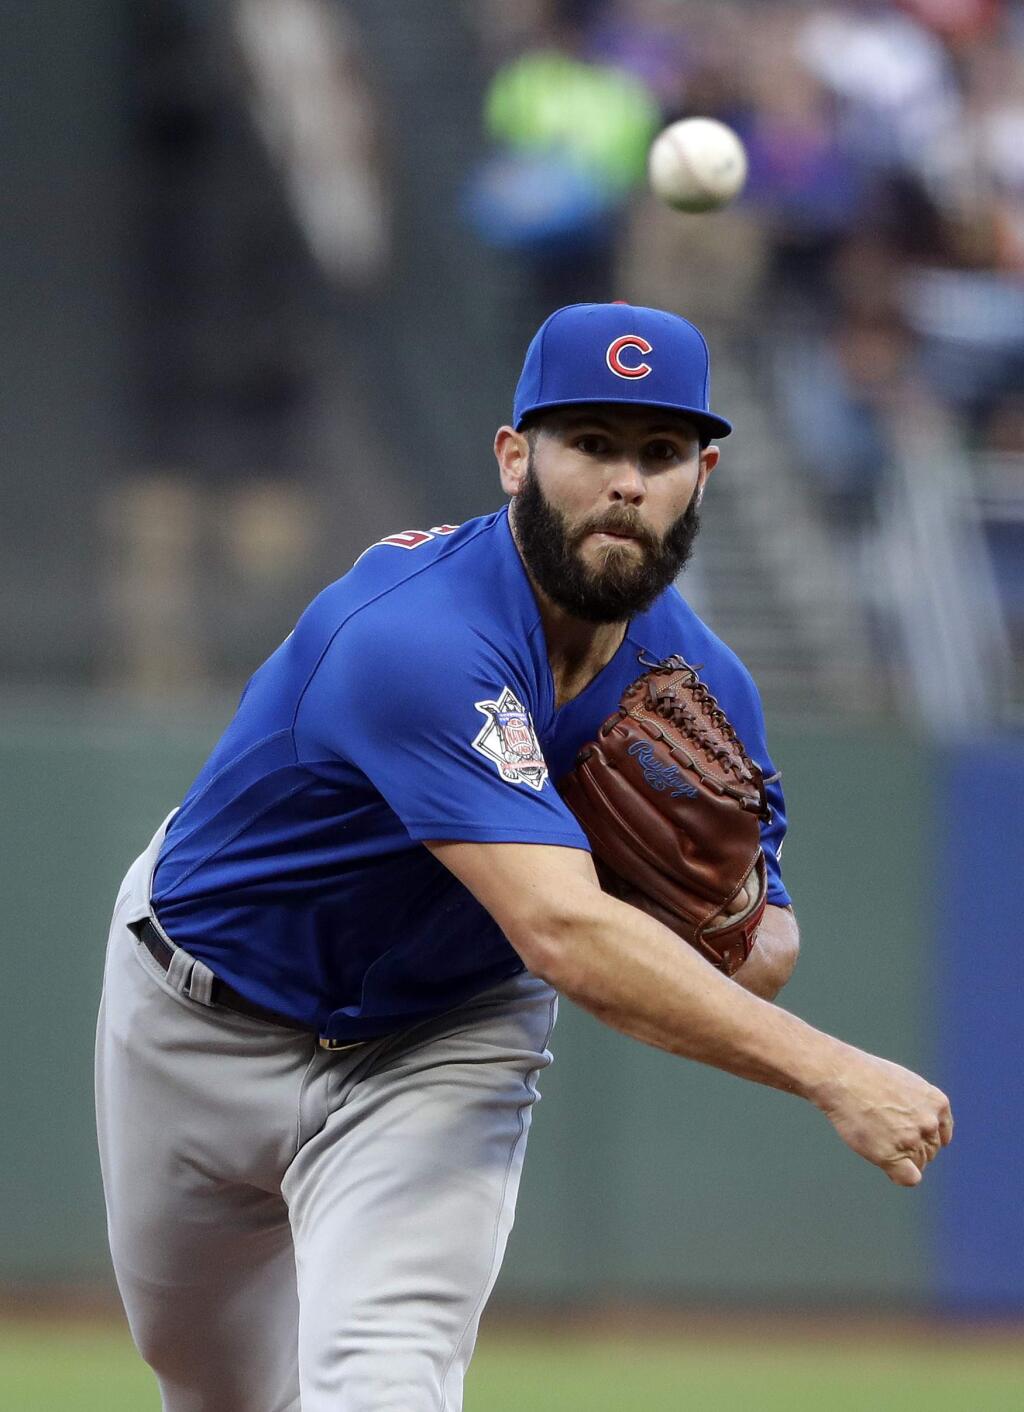 Chicago Cubs starting pitcher Jake Arrieta throws to the San Francisco Giants during the first inning of a baseball game Monday, Aug. 7, 2017, in San Francisco. (AP Photo/Marcio Jose Sanchez)